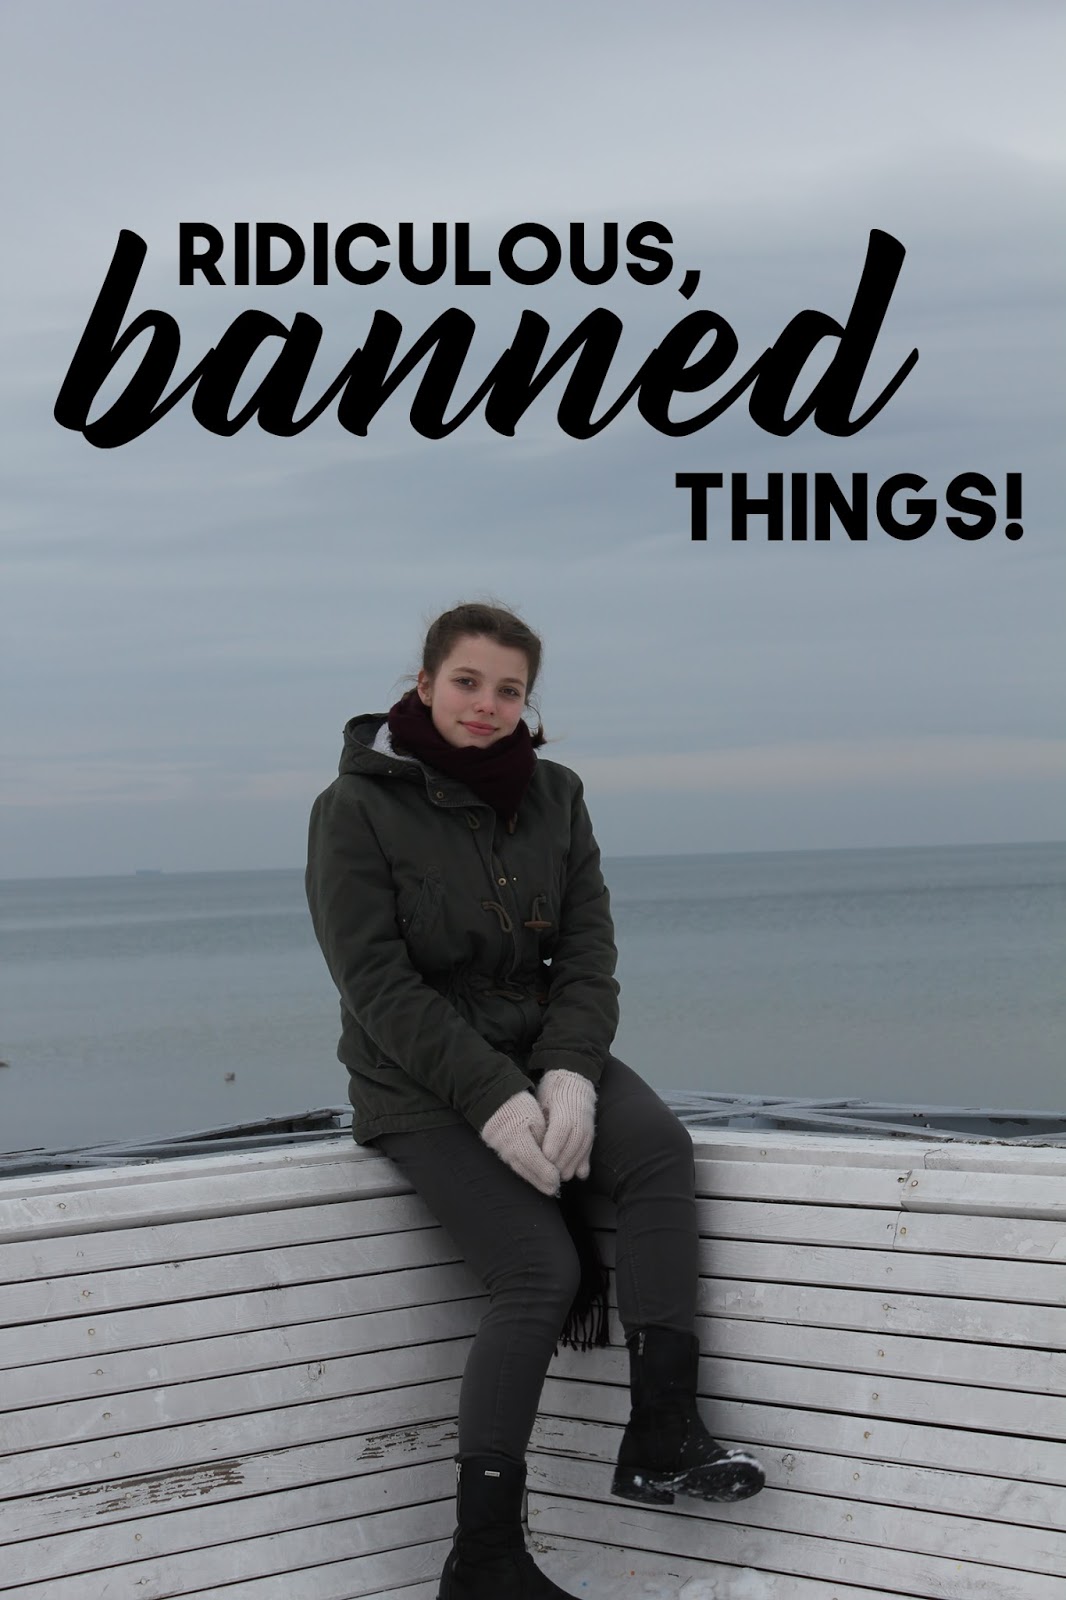  Ridiculous, banned things!